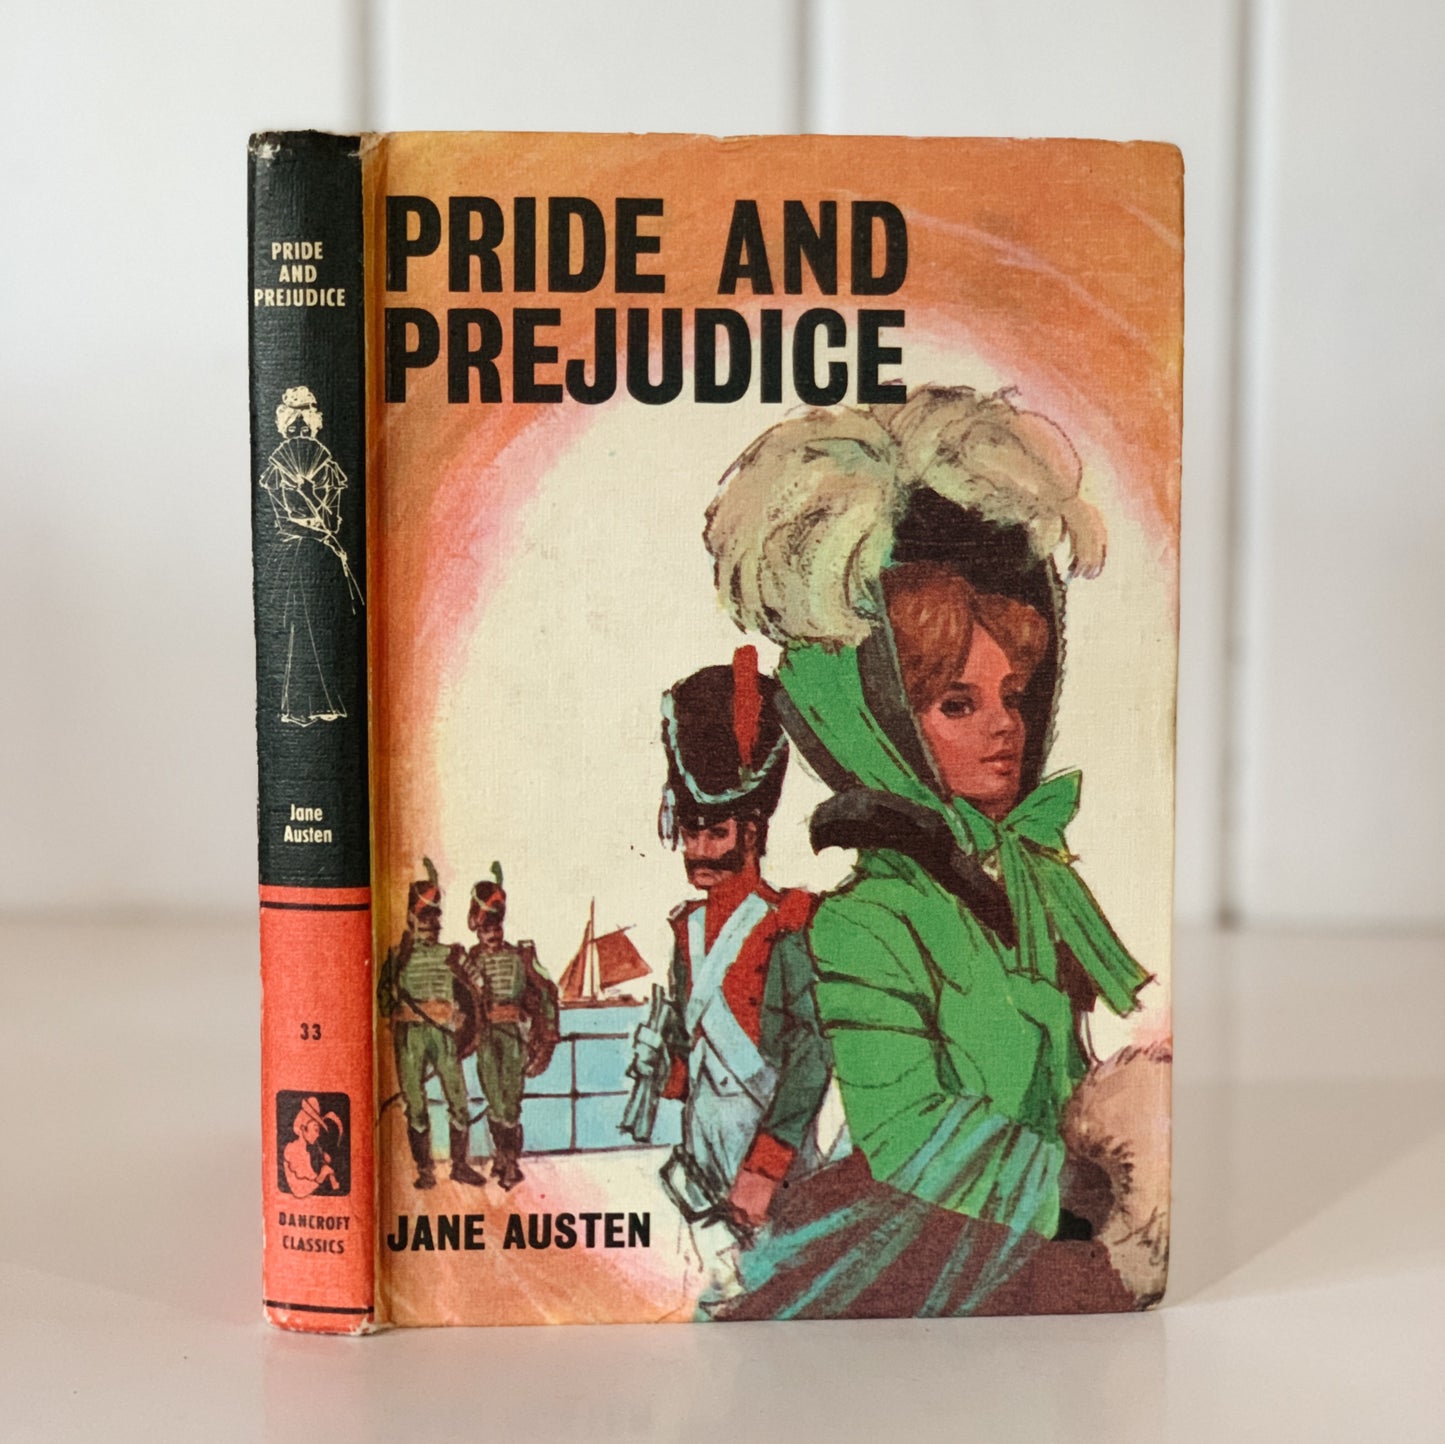 Pride and Prejudice, Bancroft Classics, 1972, Jane Austen Abridged for Young Readers